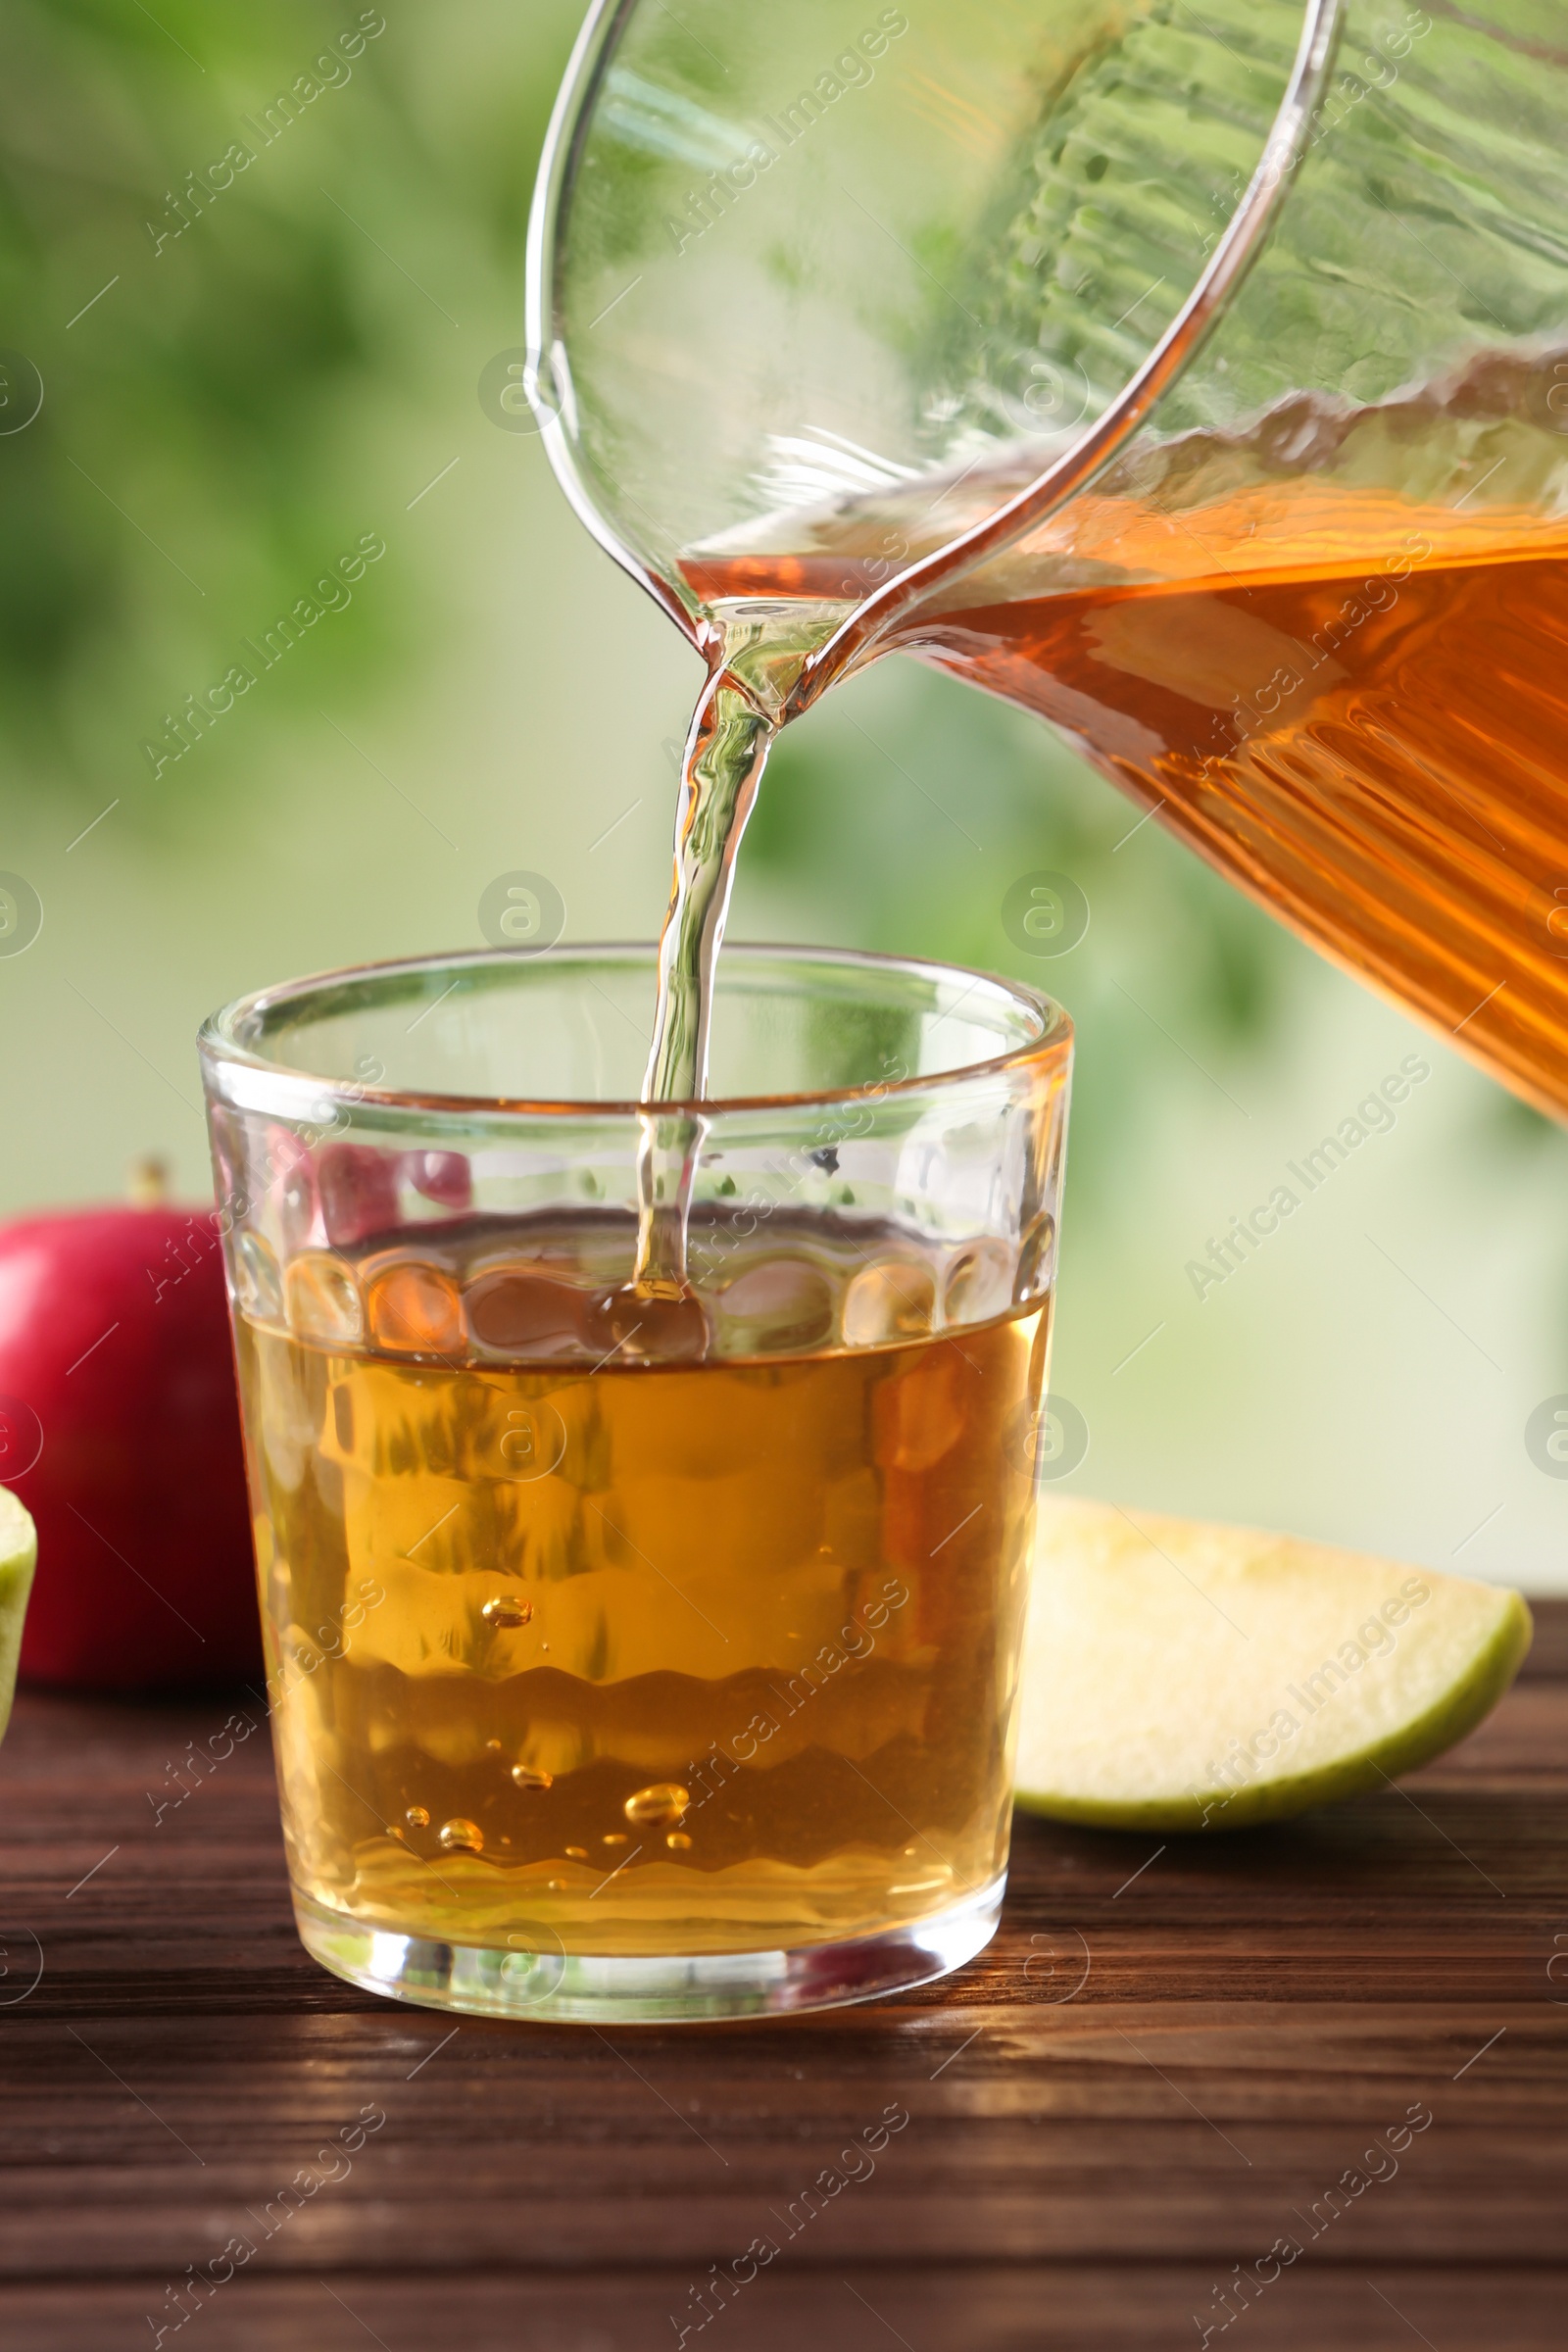 Photo of Pouring apple juice into glass on wooden table against blurred green background